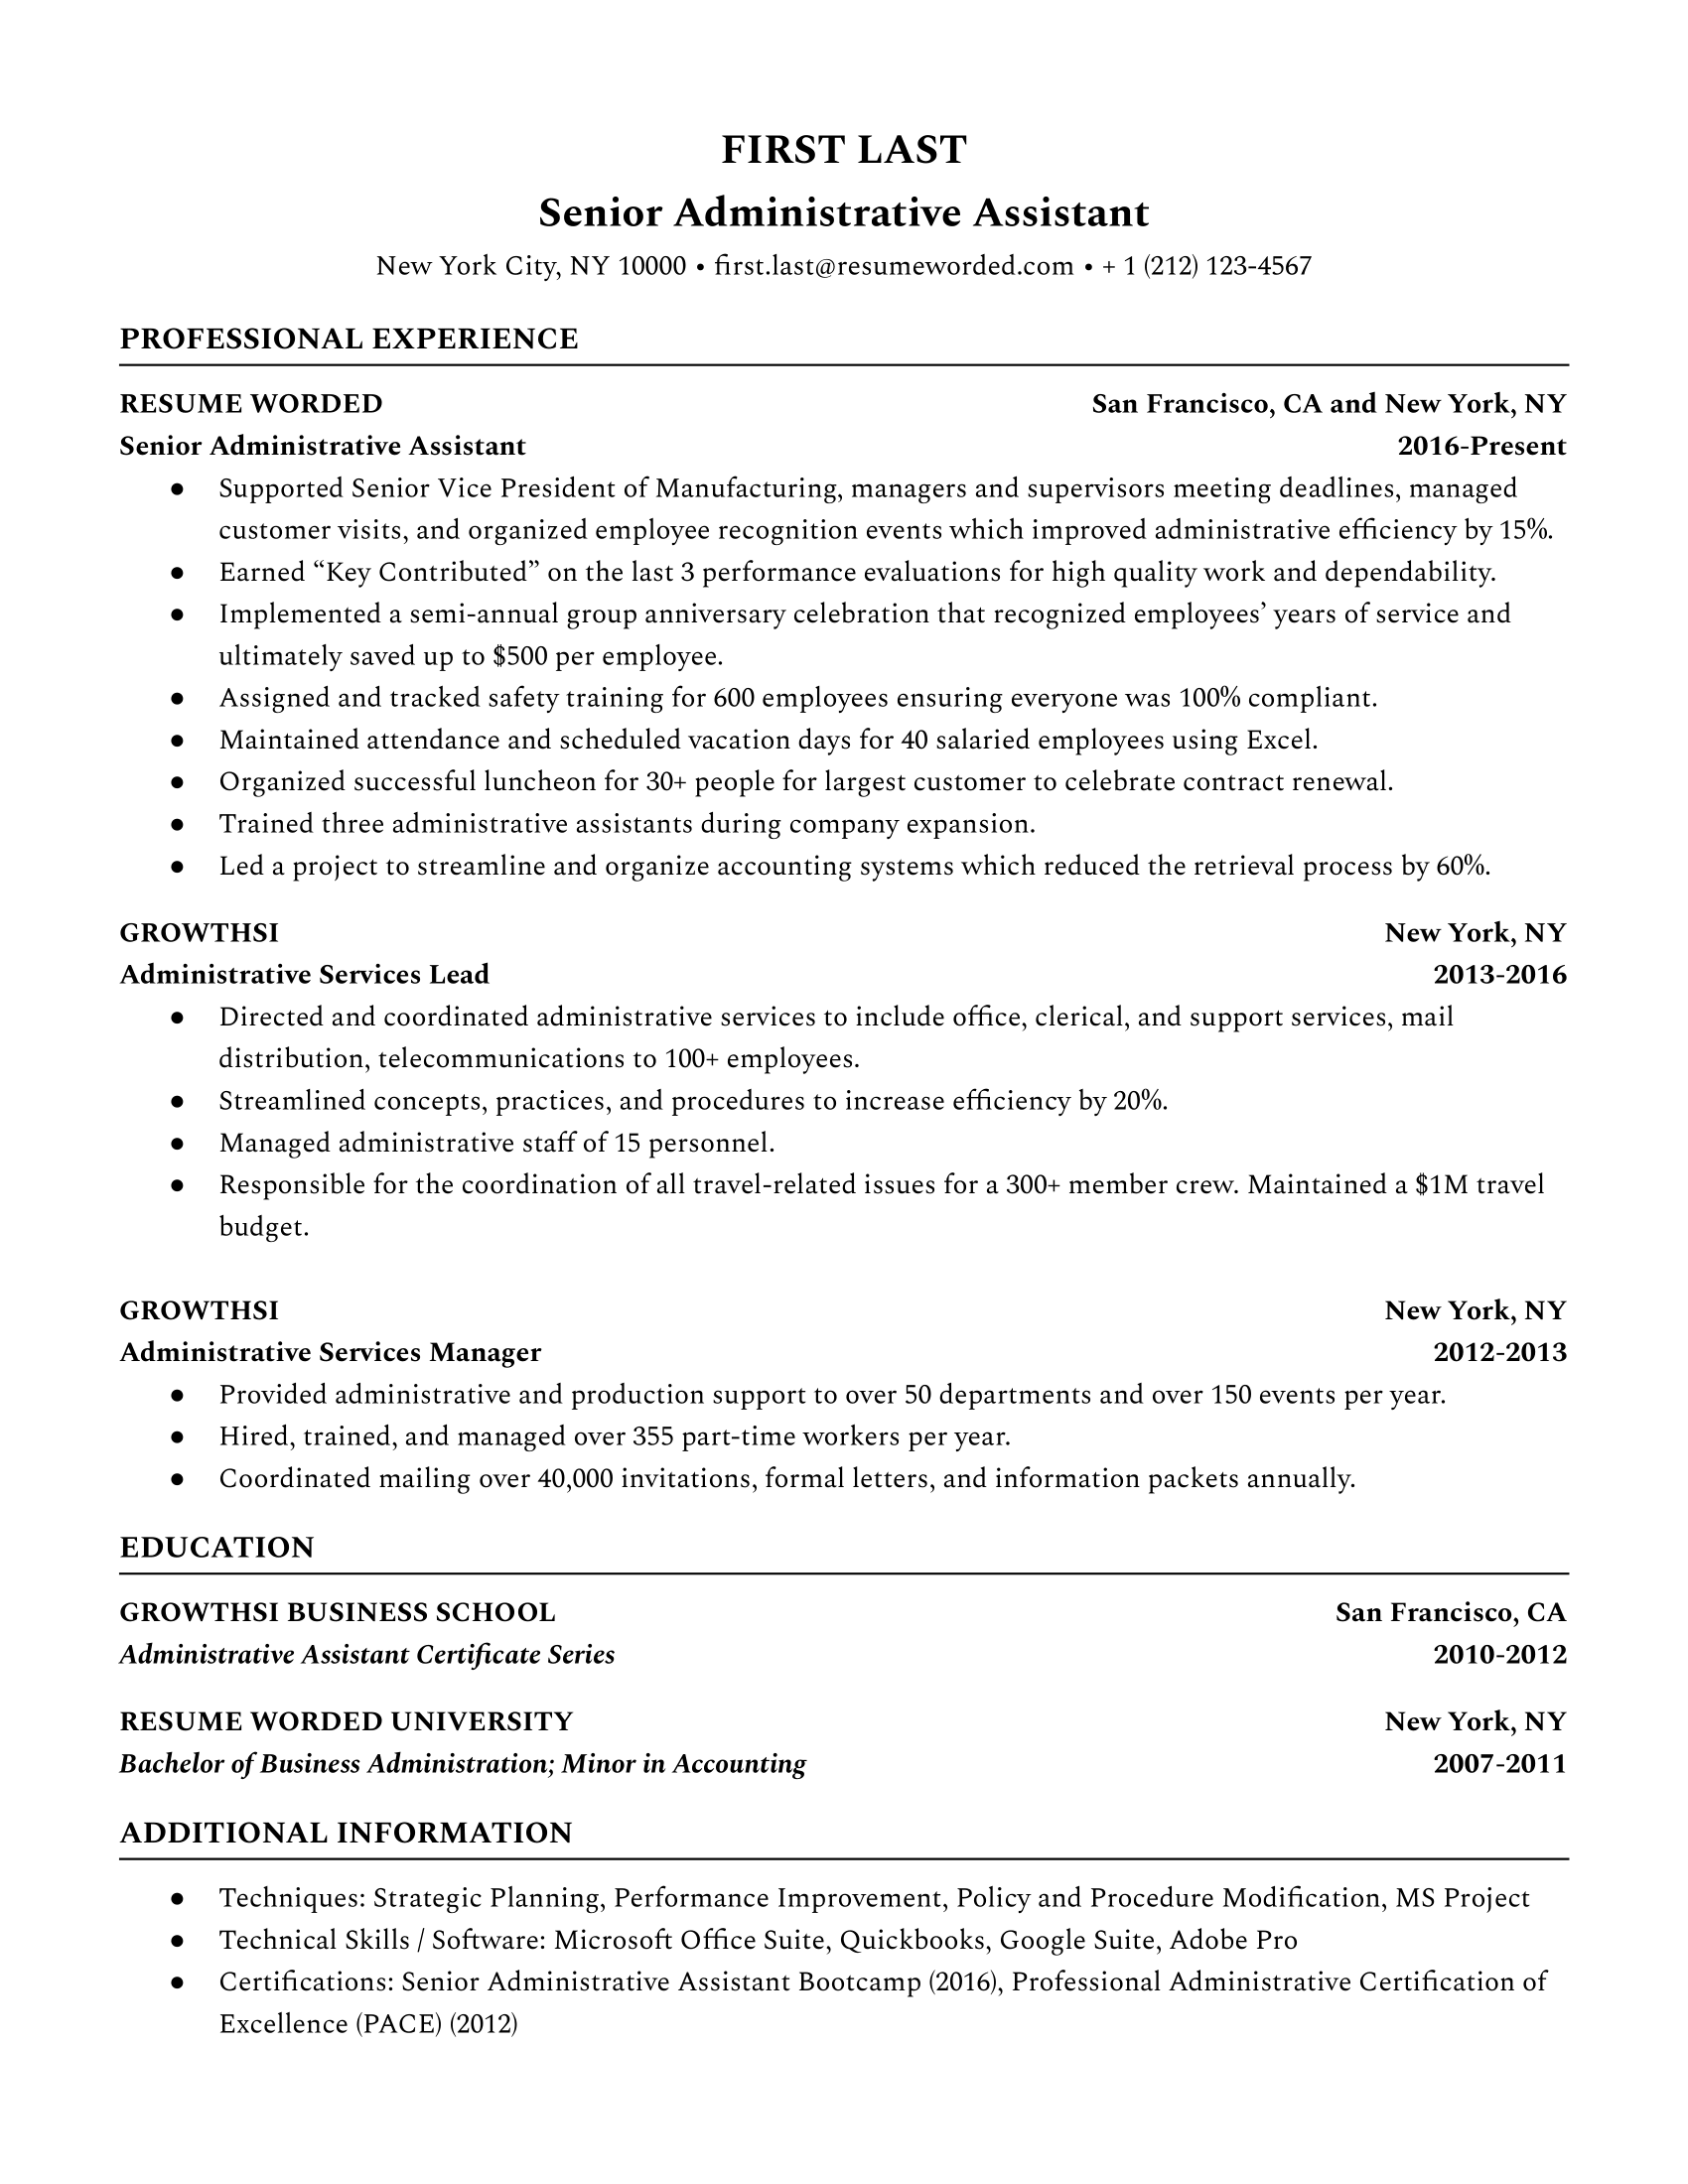 Senior Administrative Assistant Resume Template + Example